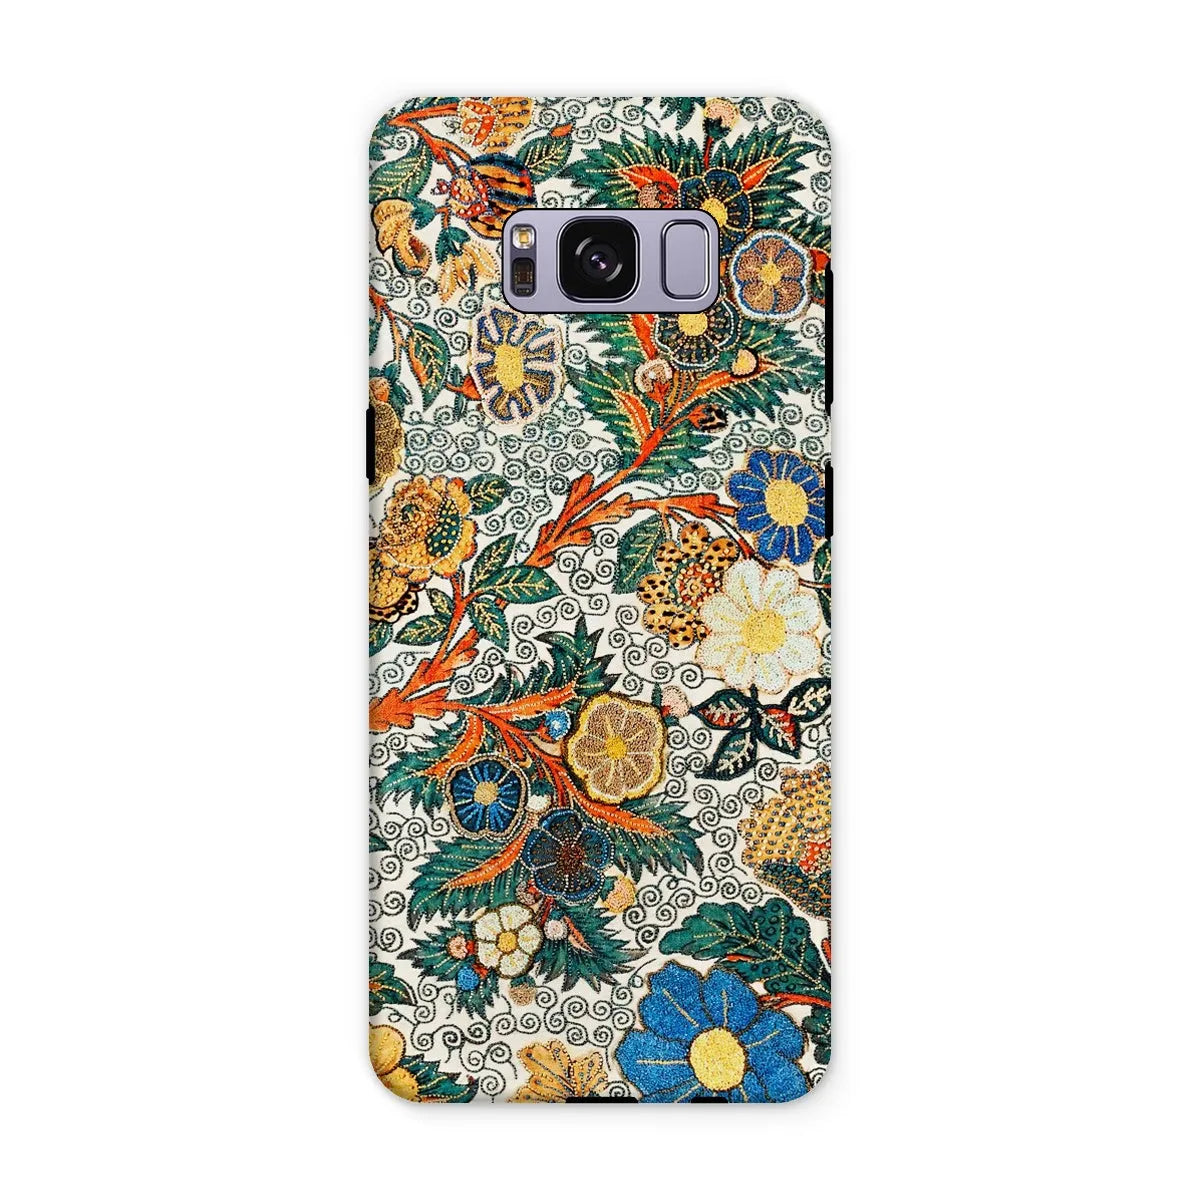 Blossomewhere Japanese Tapestry Art Phone Case - Samsung Galaxy S8 Plus / Matte - Mobile Phone Cases - Aesthetic Art